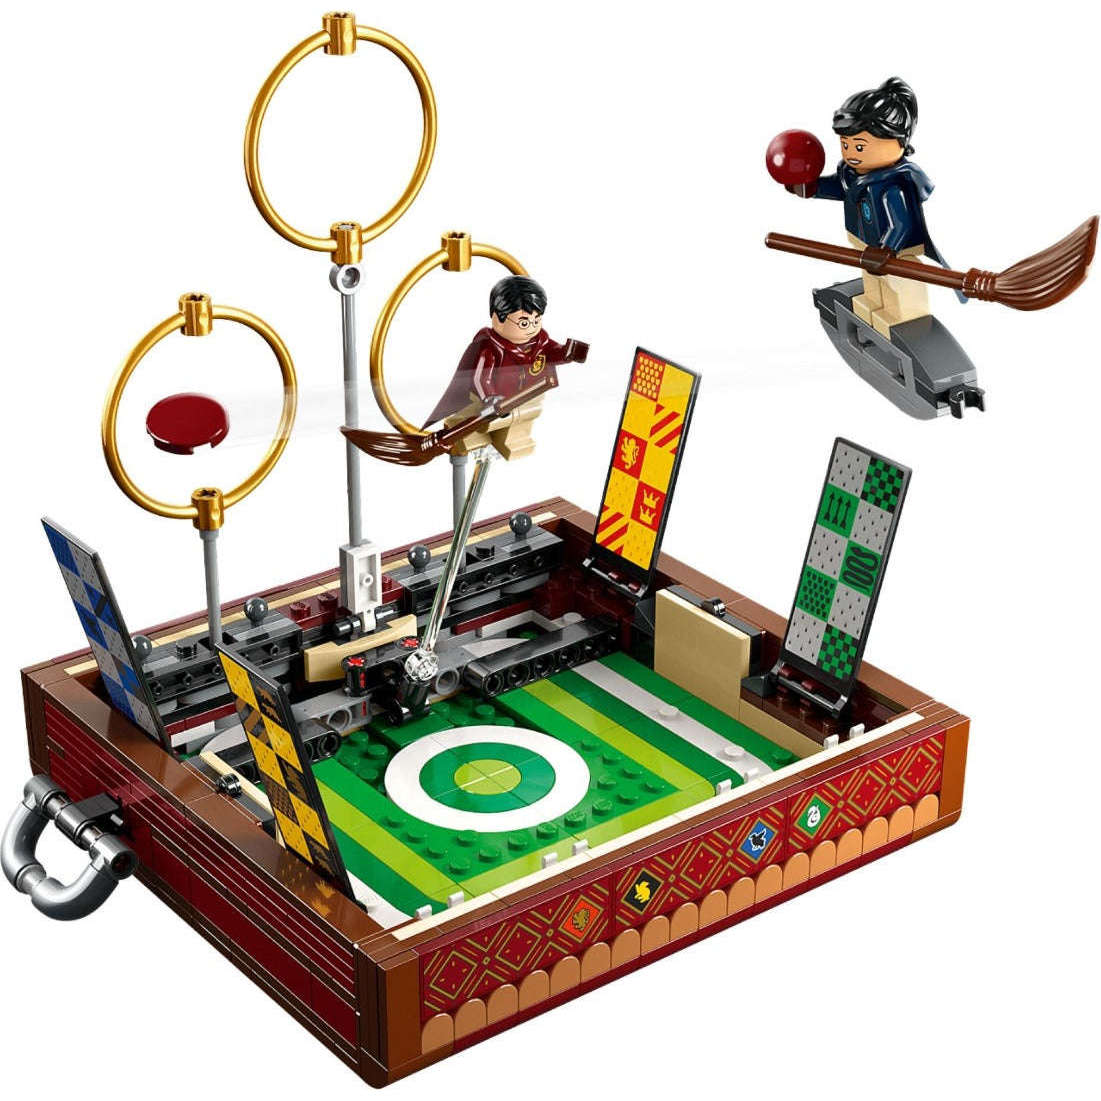 Toys N Tuck:Lego 76416 Harry Potter Quidditch Trunk,Lego Harry Potter